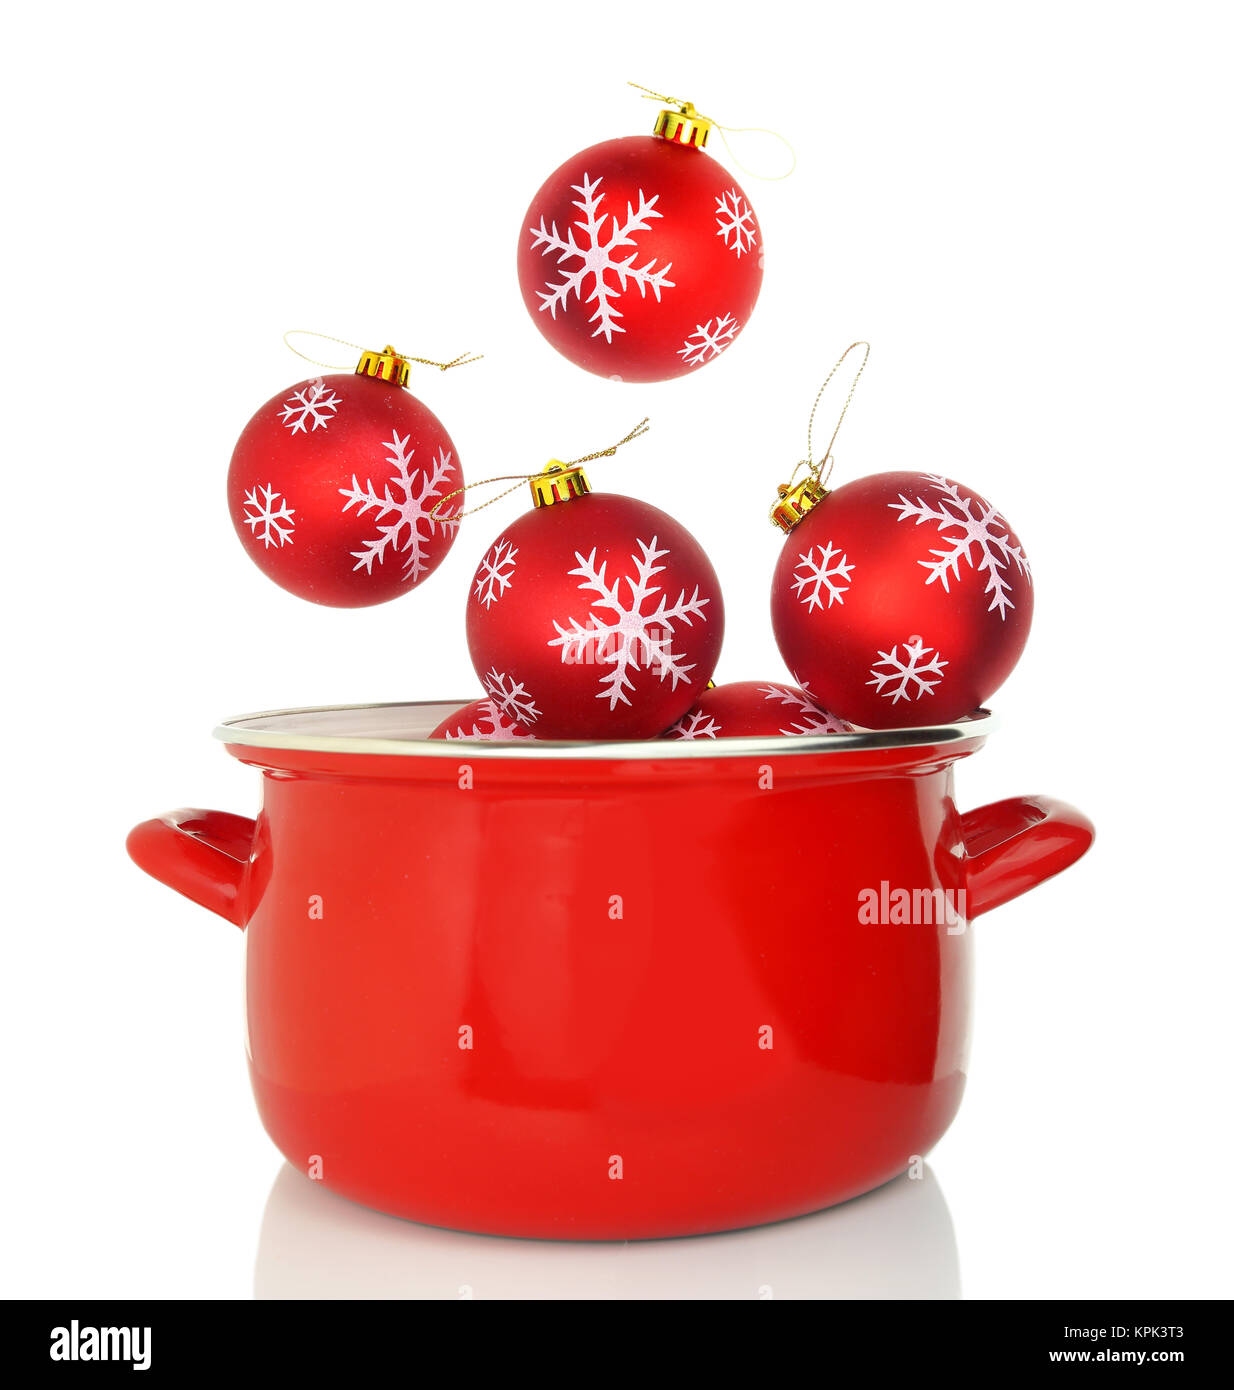 Red cooking pot with Christmas ornaments Stock Photo